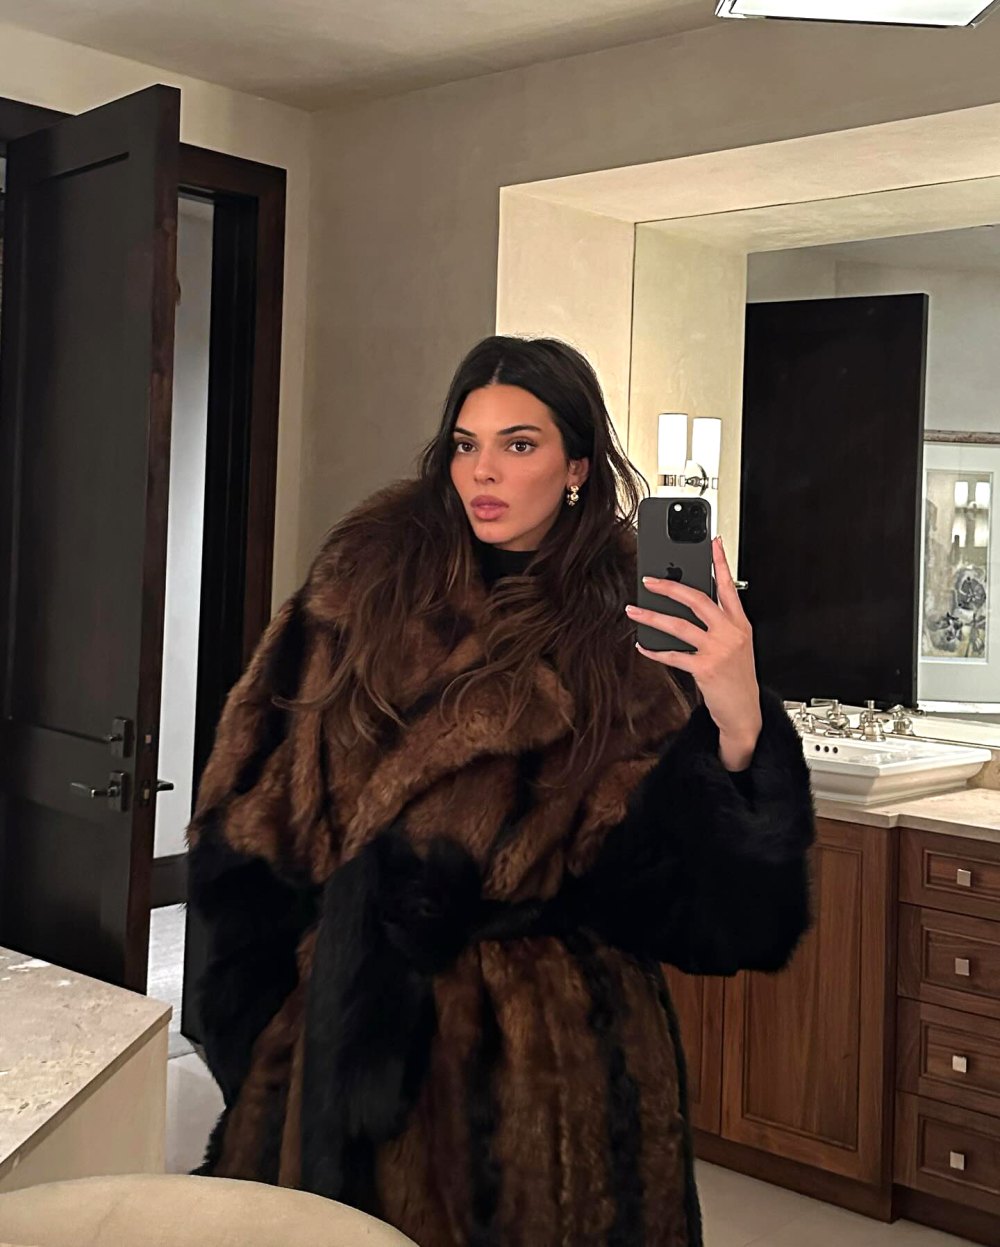 https://www.usmagazine.com/wp-content/uploads/2023/12/Kendall-Jenner-Creates-Controversy-in-Oversized-Fur-Coat-03.jpg?w=1000&quality=86&strip=all